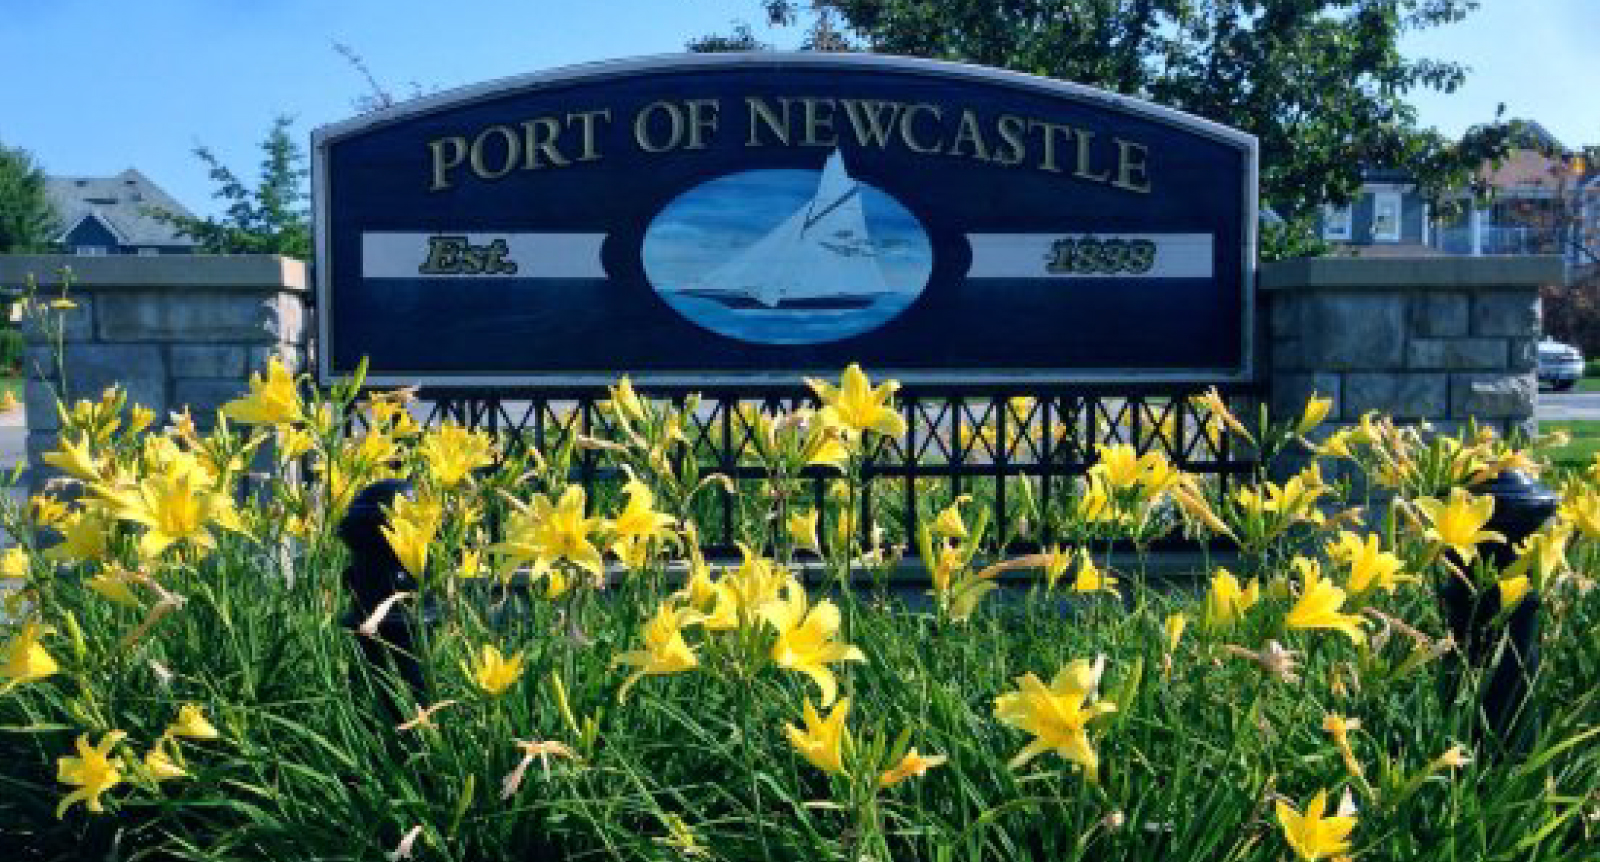 Photograph of Port of Newcastle sign.